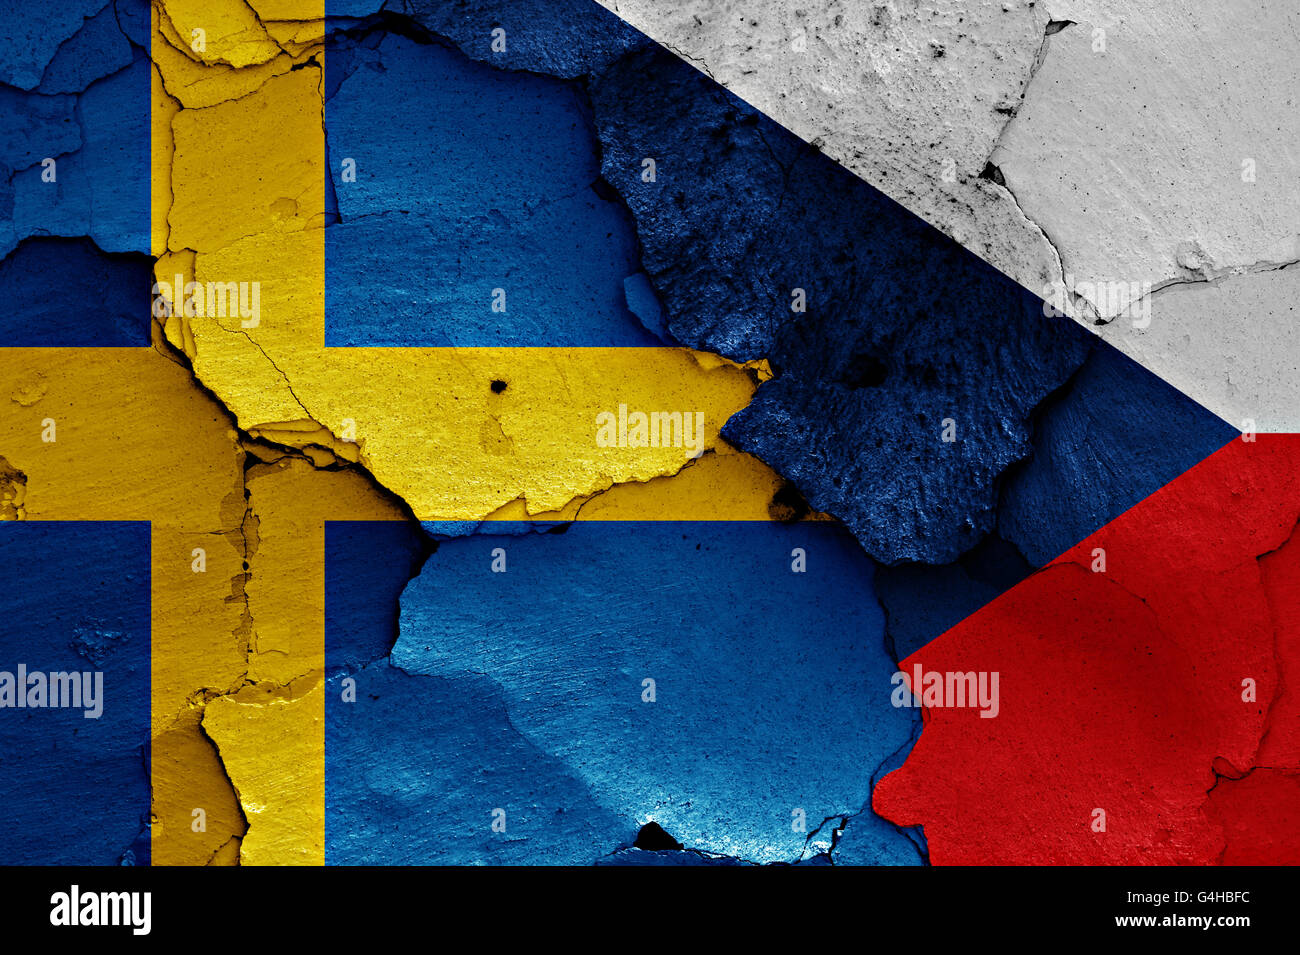 flags of Sweden and Czechia painted on cracked wall Stock Photo